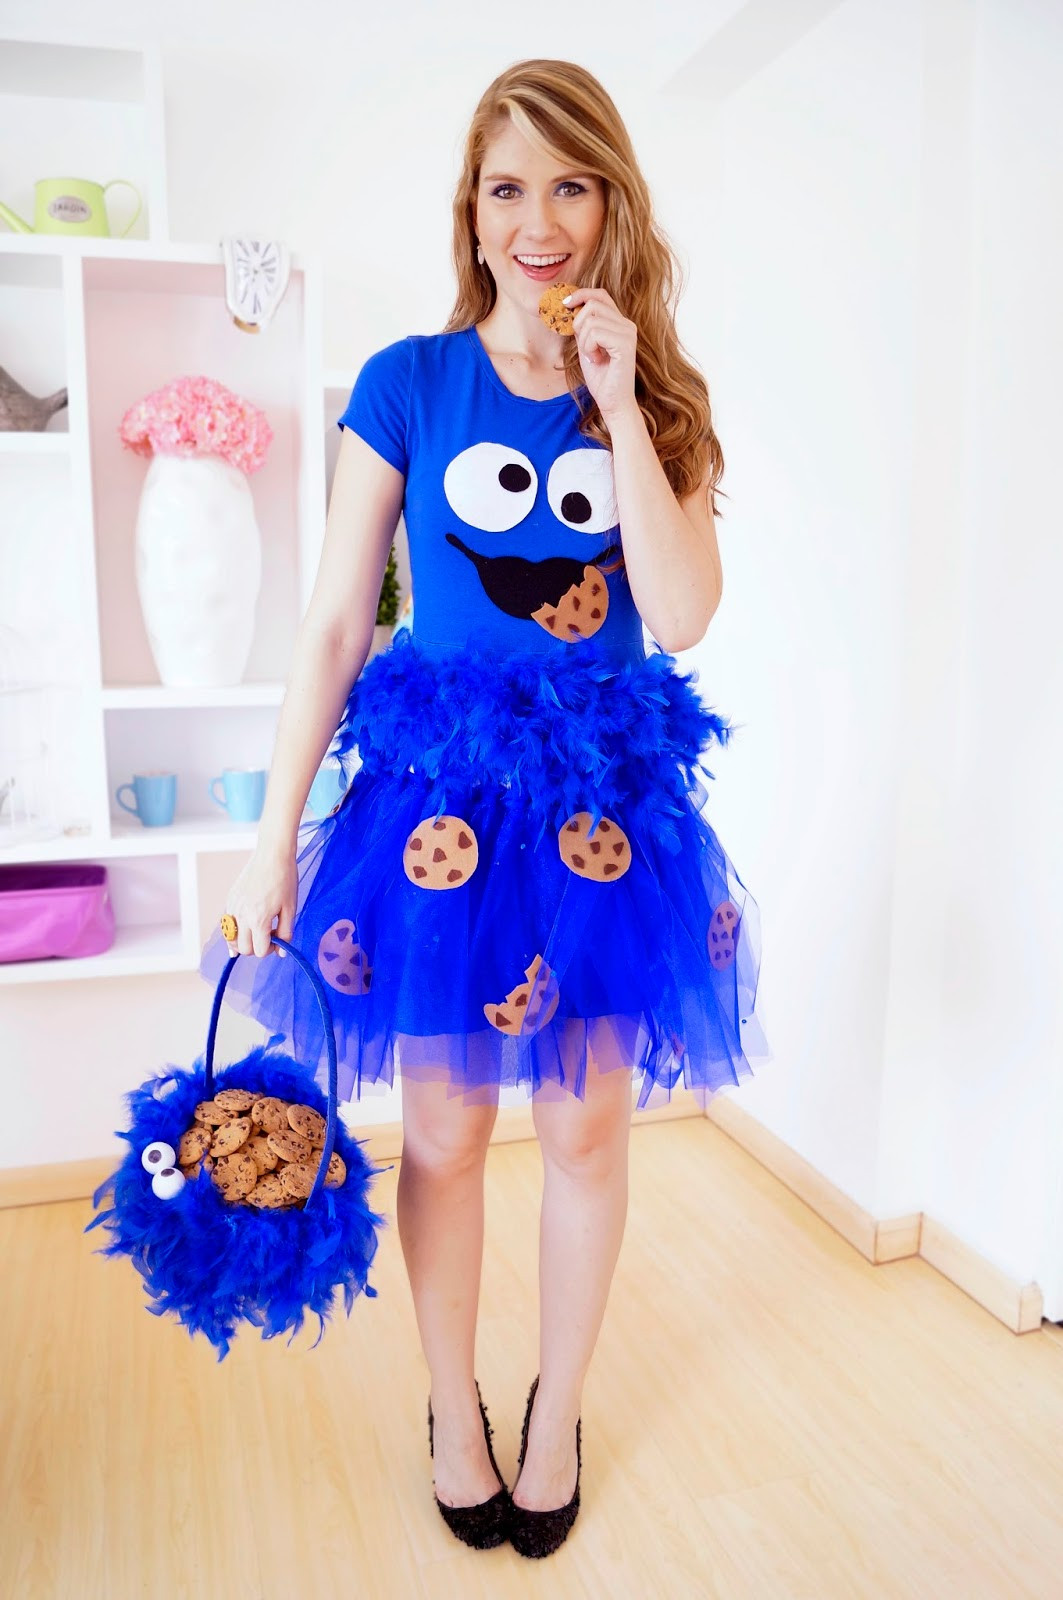 Cookie Monster Costume DIY
 The 15 Best DIY Halloween Costumes for Adults